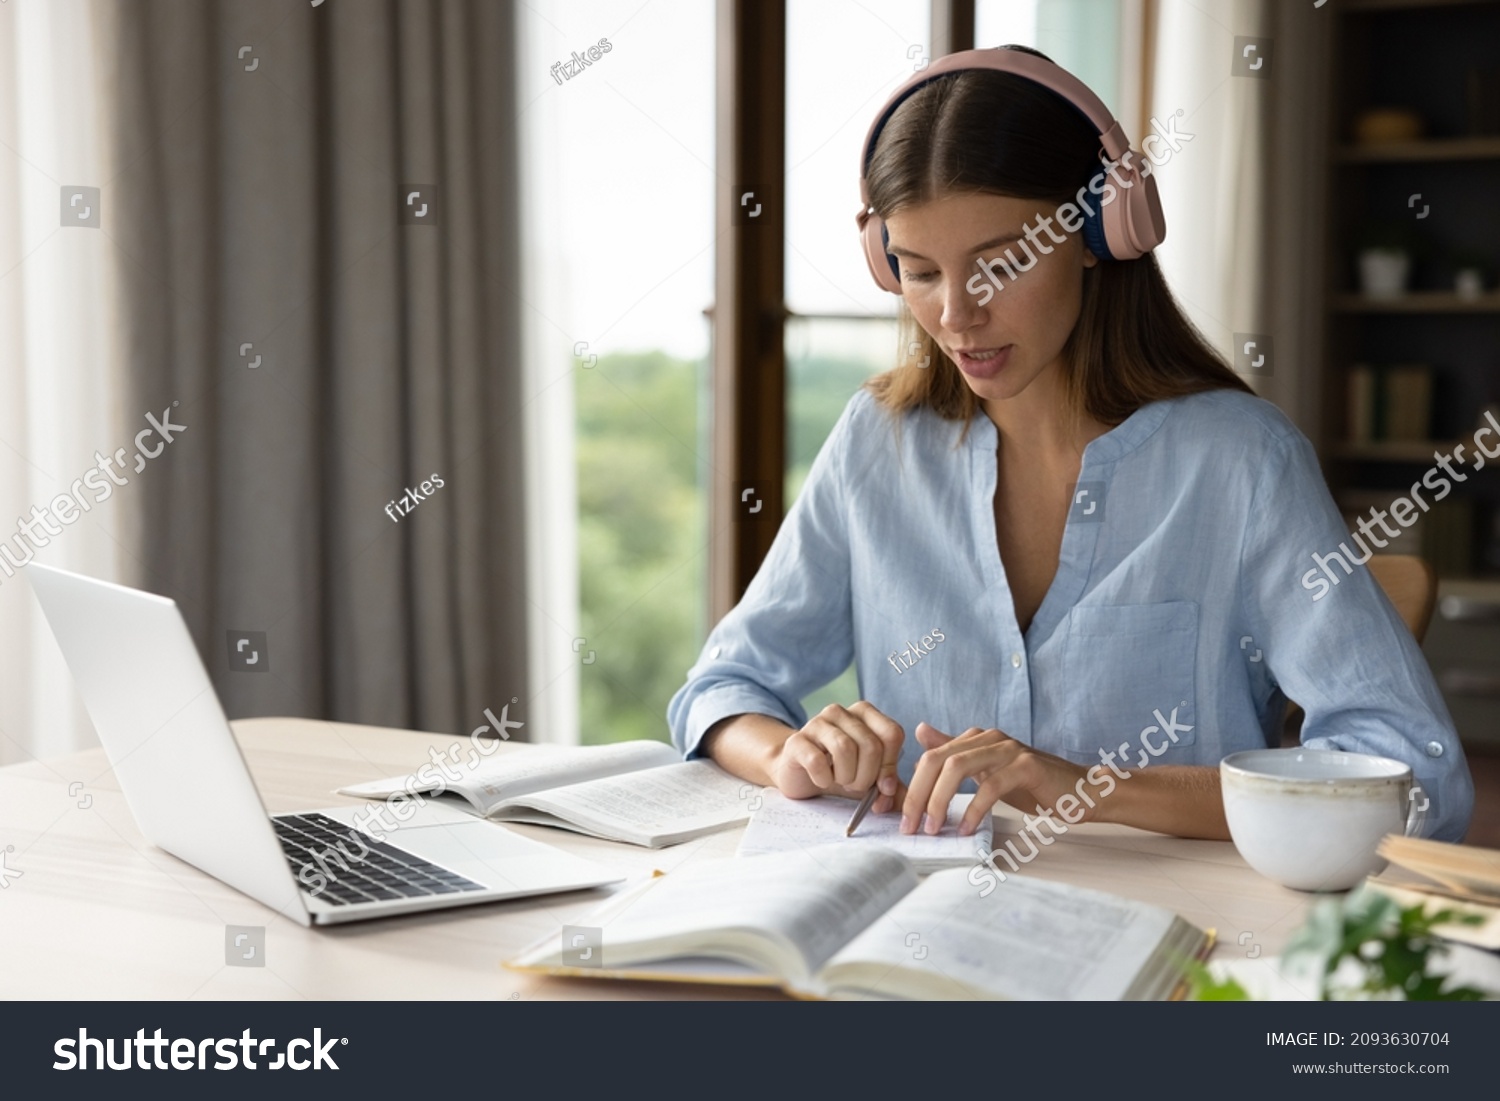 Focused engaged student girl in big headphones studying foreign language, listening audio lesson at laptop, reading notes out loud, doing exercises from open book, school, college homework task #2093630704